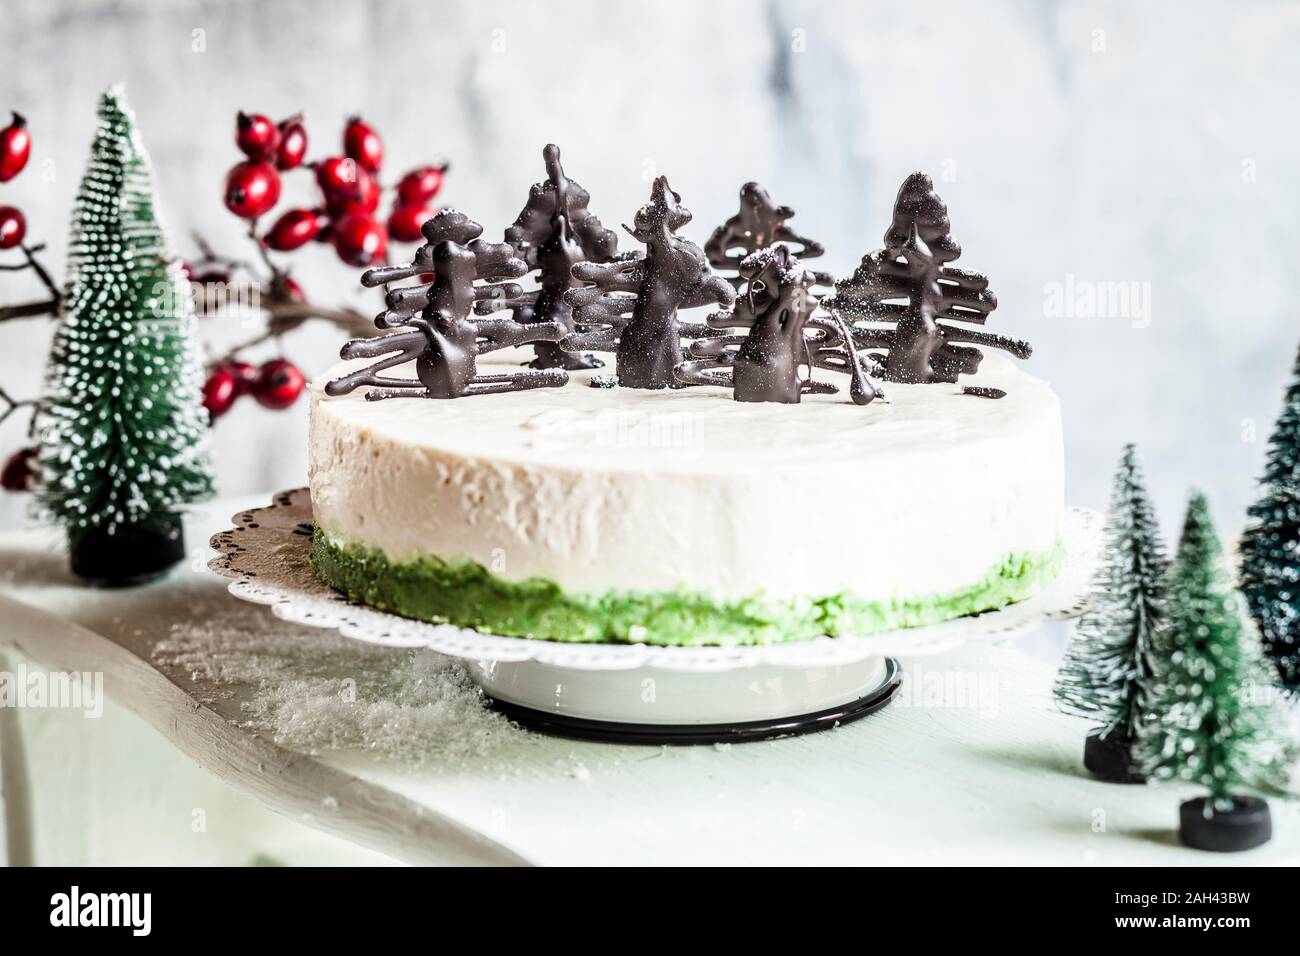 No-bake cheesecake, decorated with chocolate Christmas trees Stock Photo -  Alamy